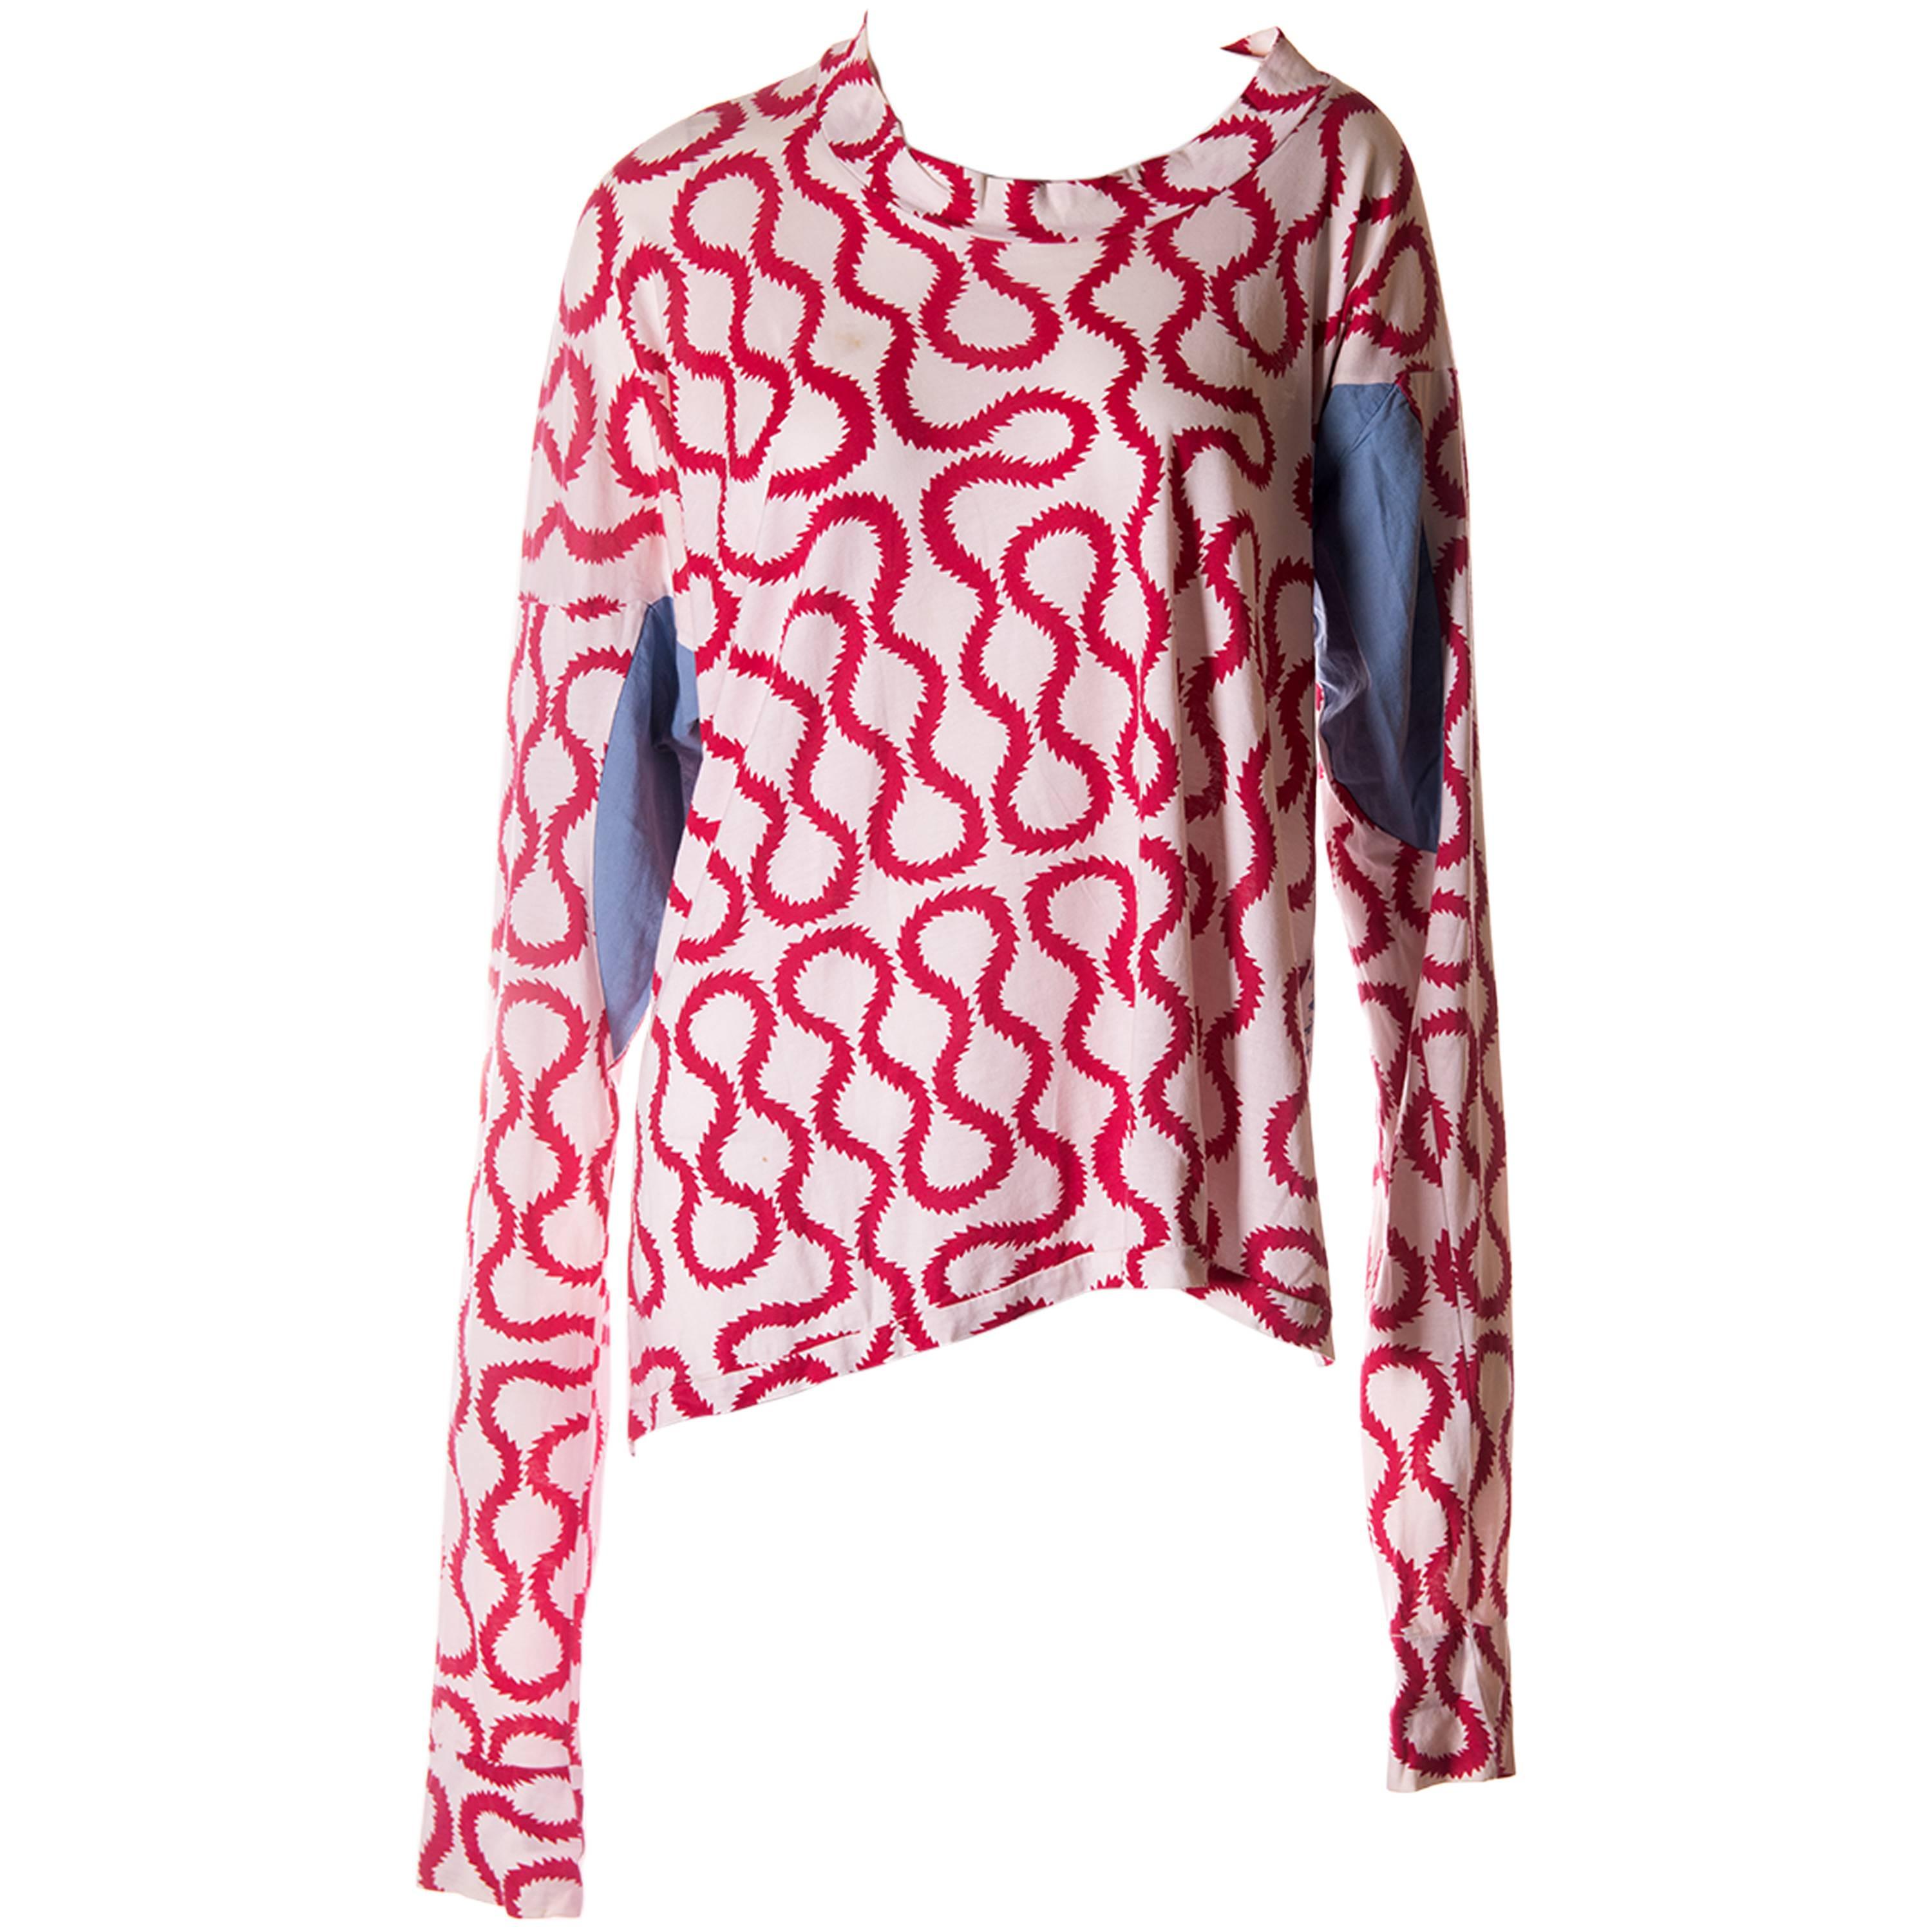 Vivienne Westwood World's End Iconic Squiggle Print Top